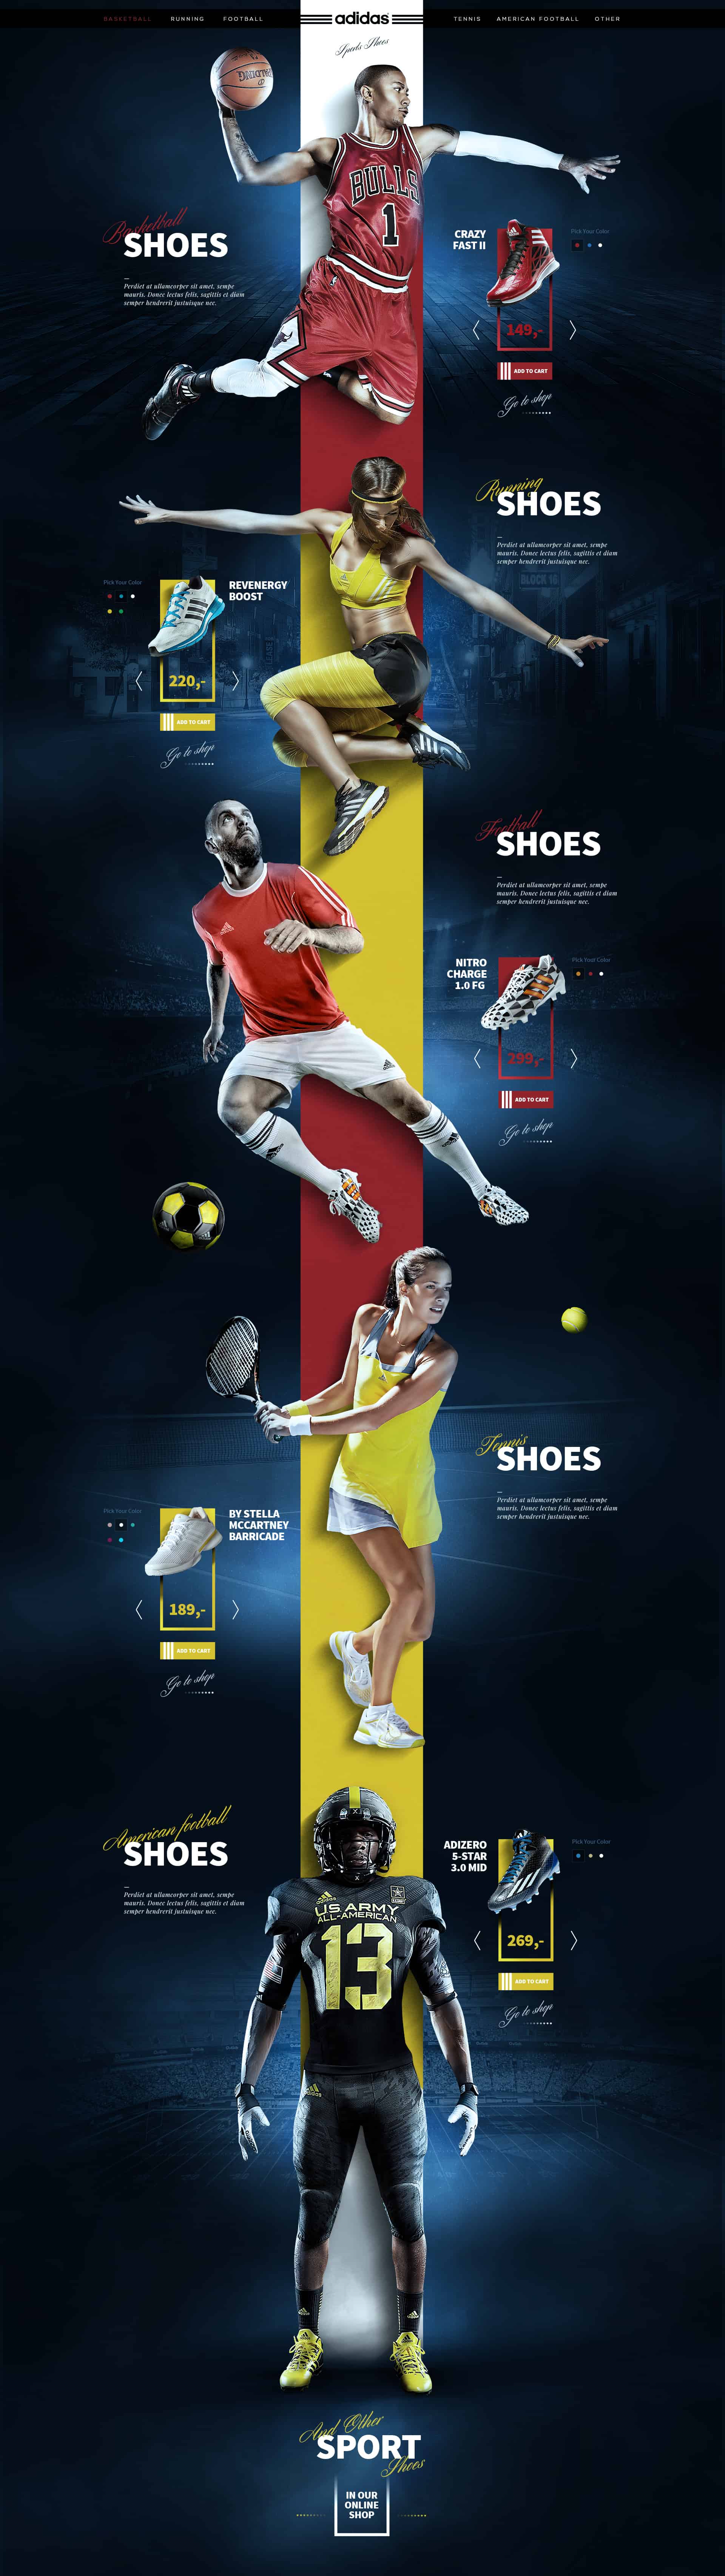 Adidas Sports Shoes Concept_